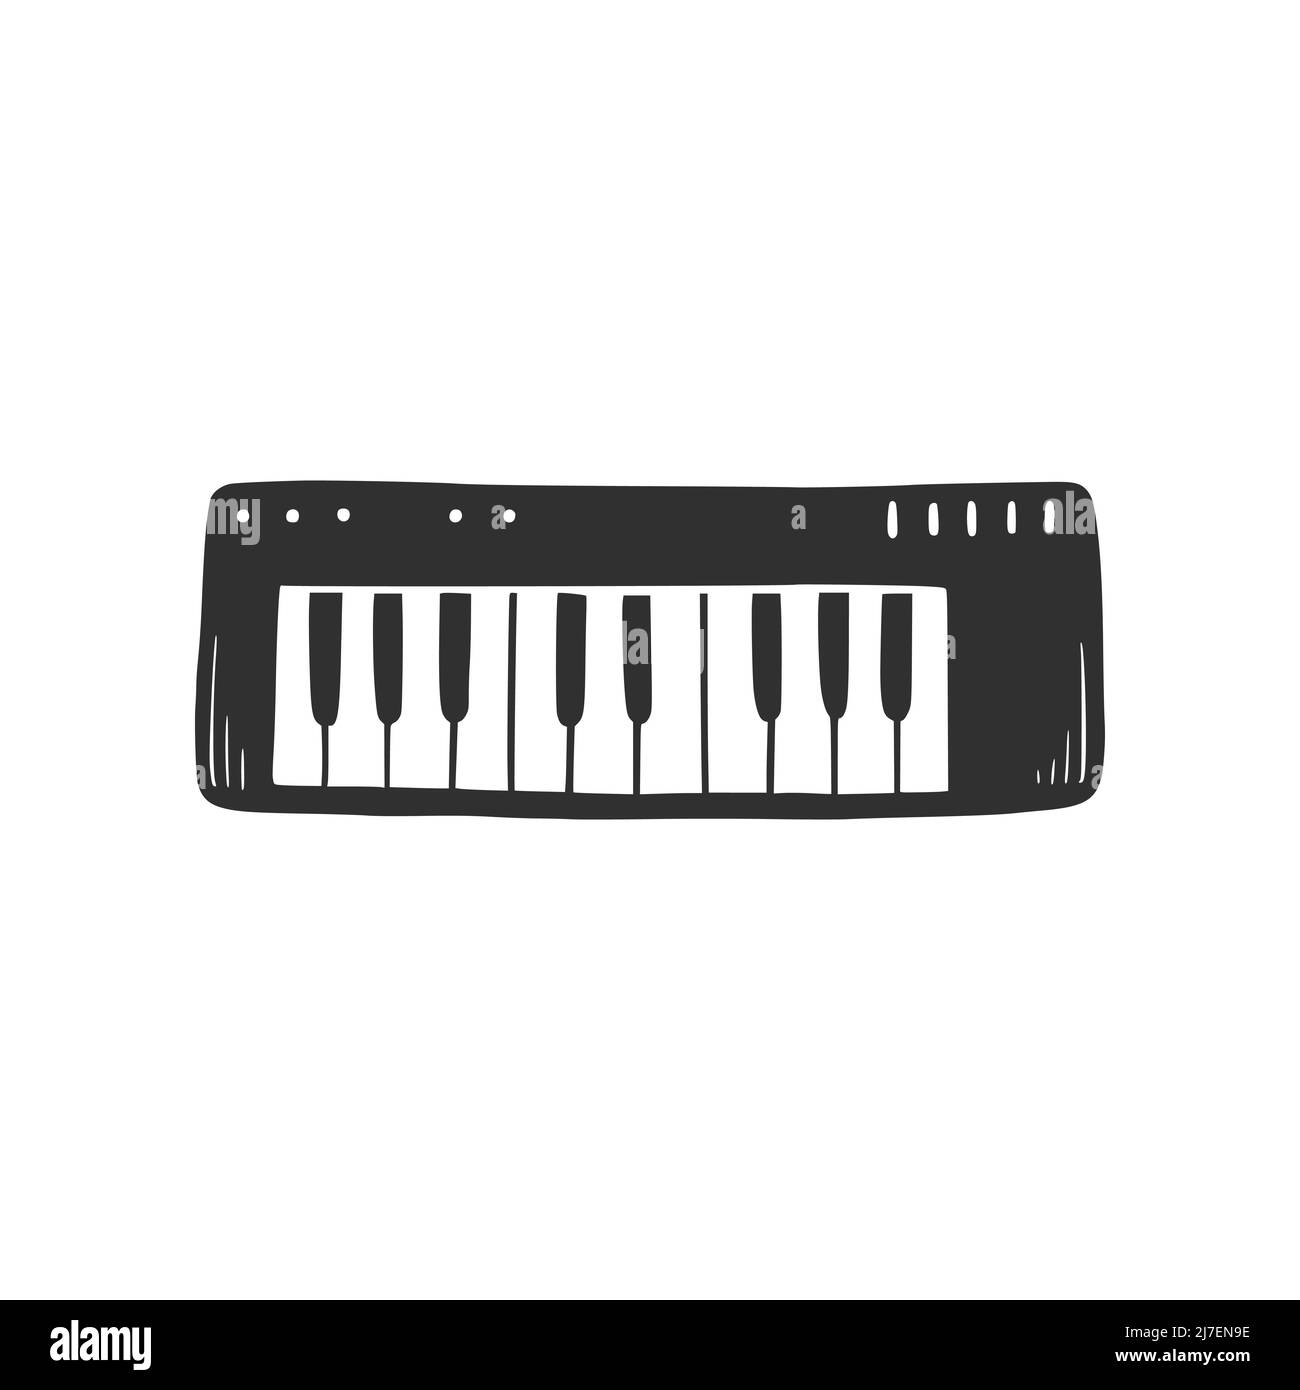 Hands without nails on keyboard of computer - vector illustration sketch  hand drawn with black lines, isolated on white background Stock Vector by  ©a3701027d 159226086